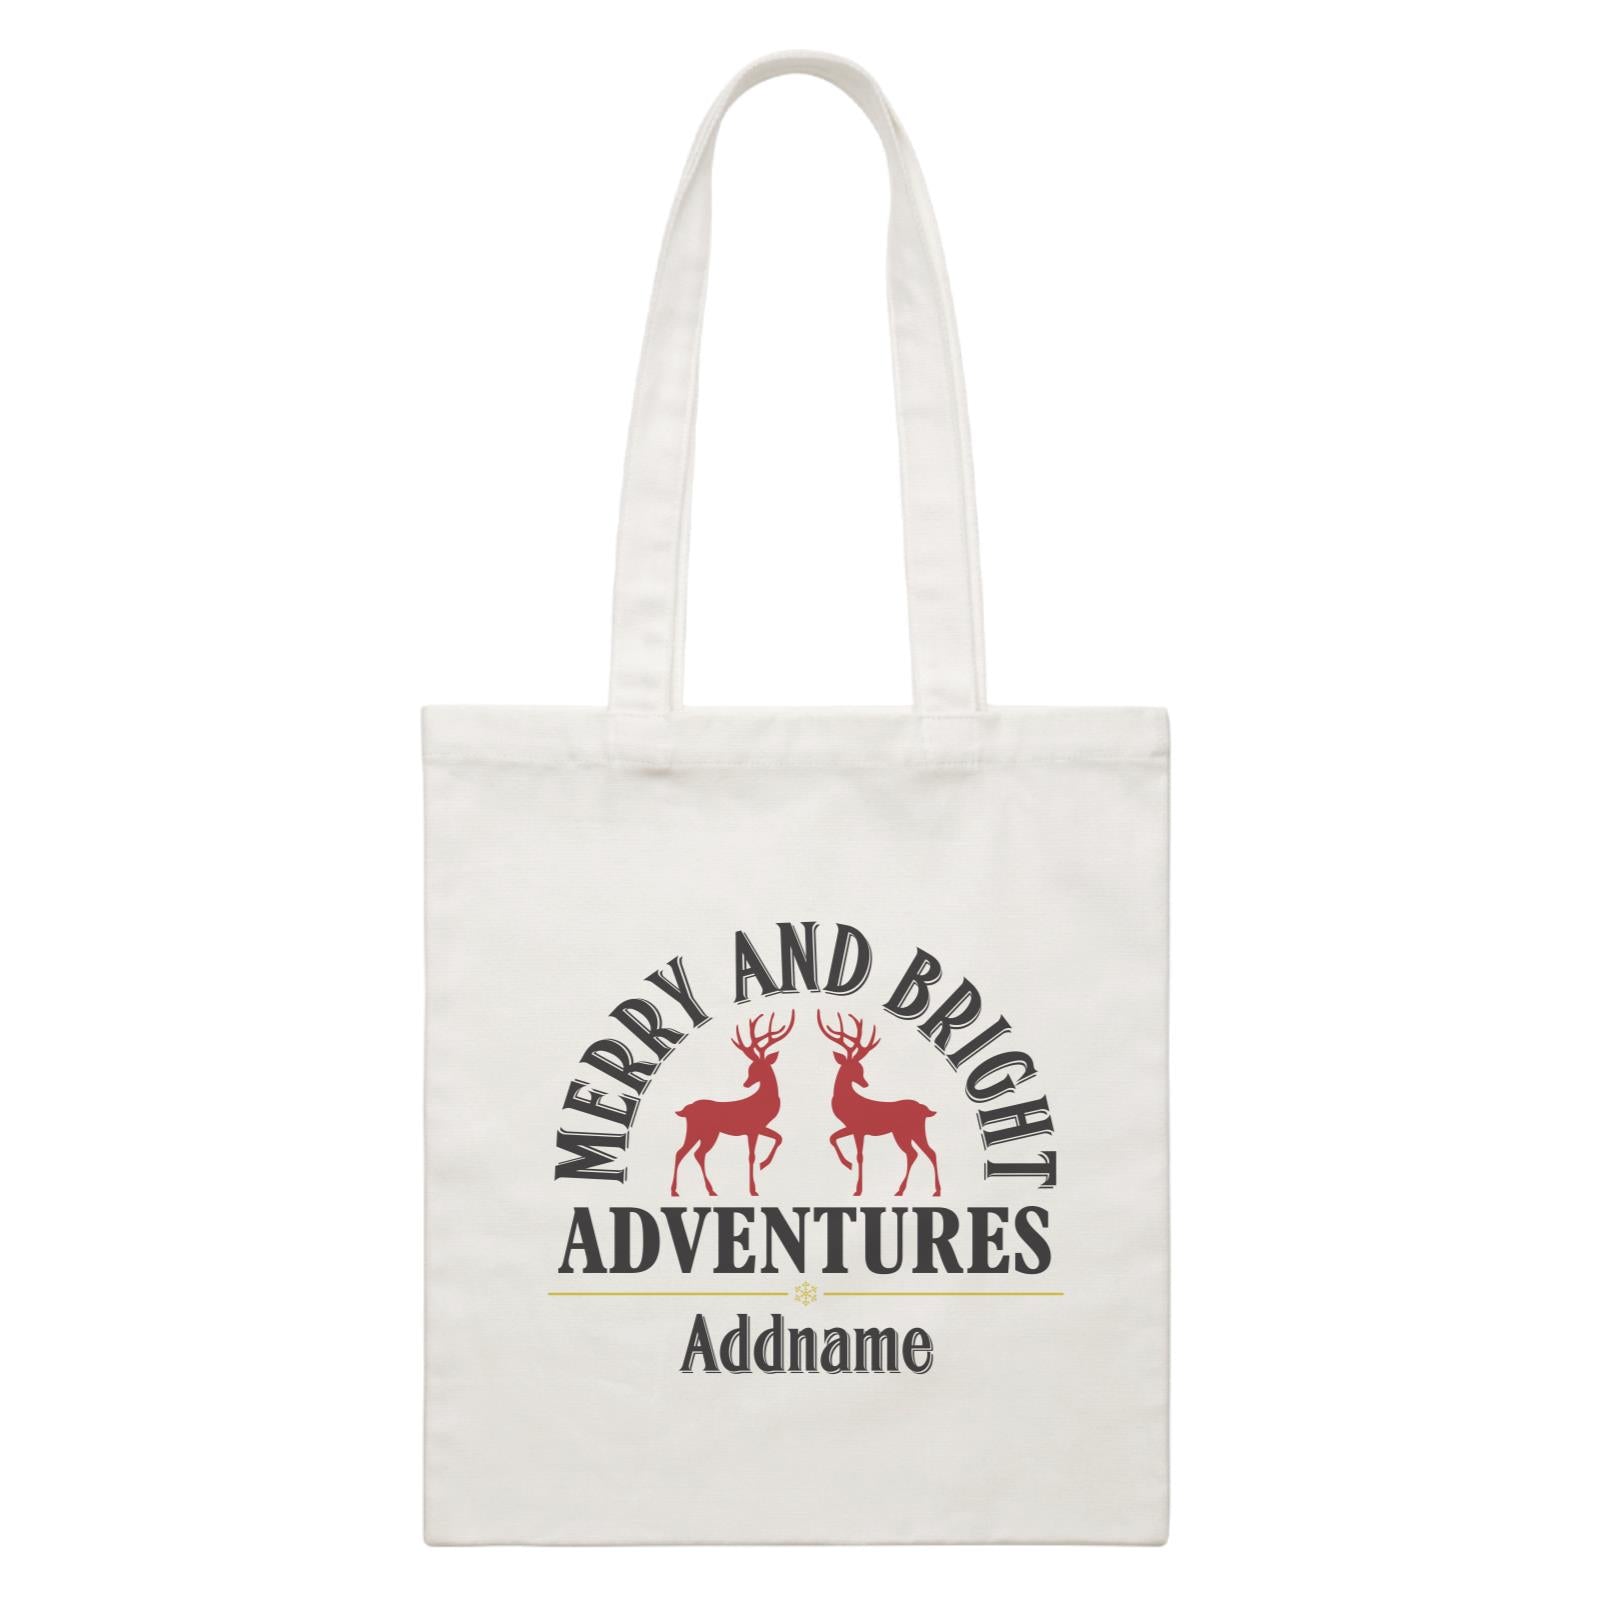 Xmas Merry and Bright Adventures with Reindeers Canvas Bag